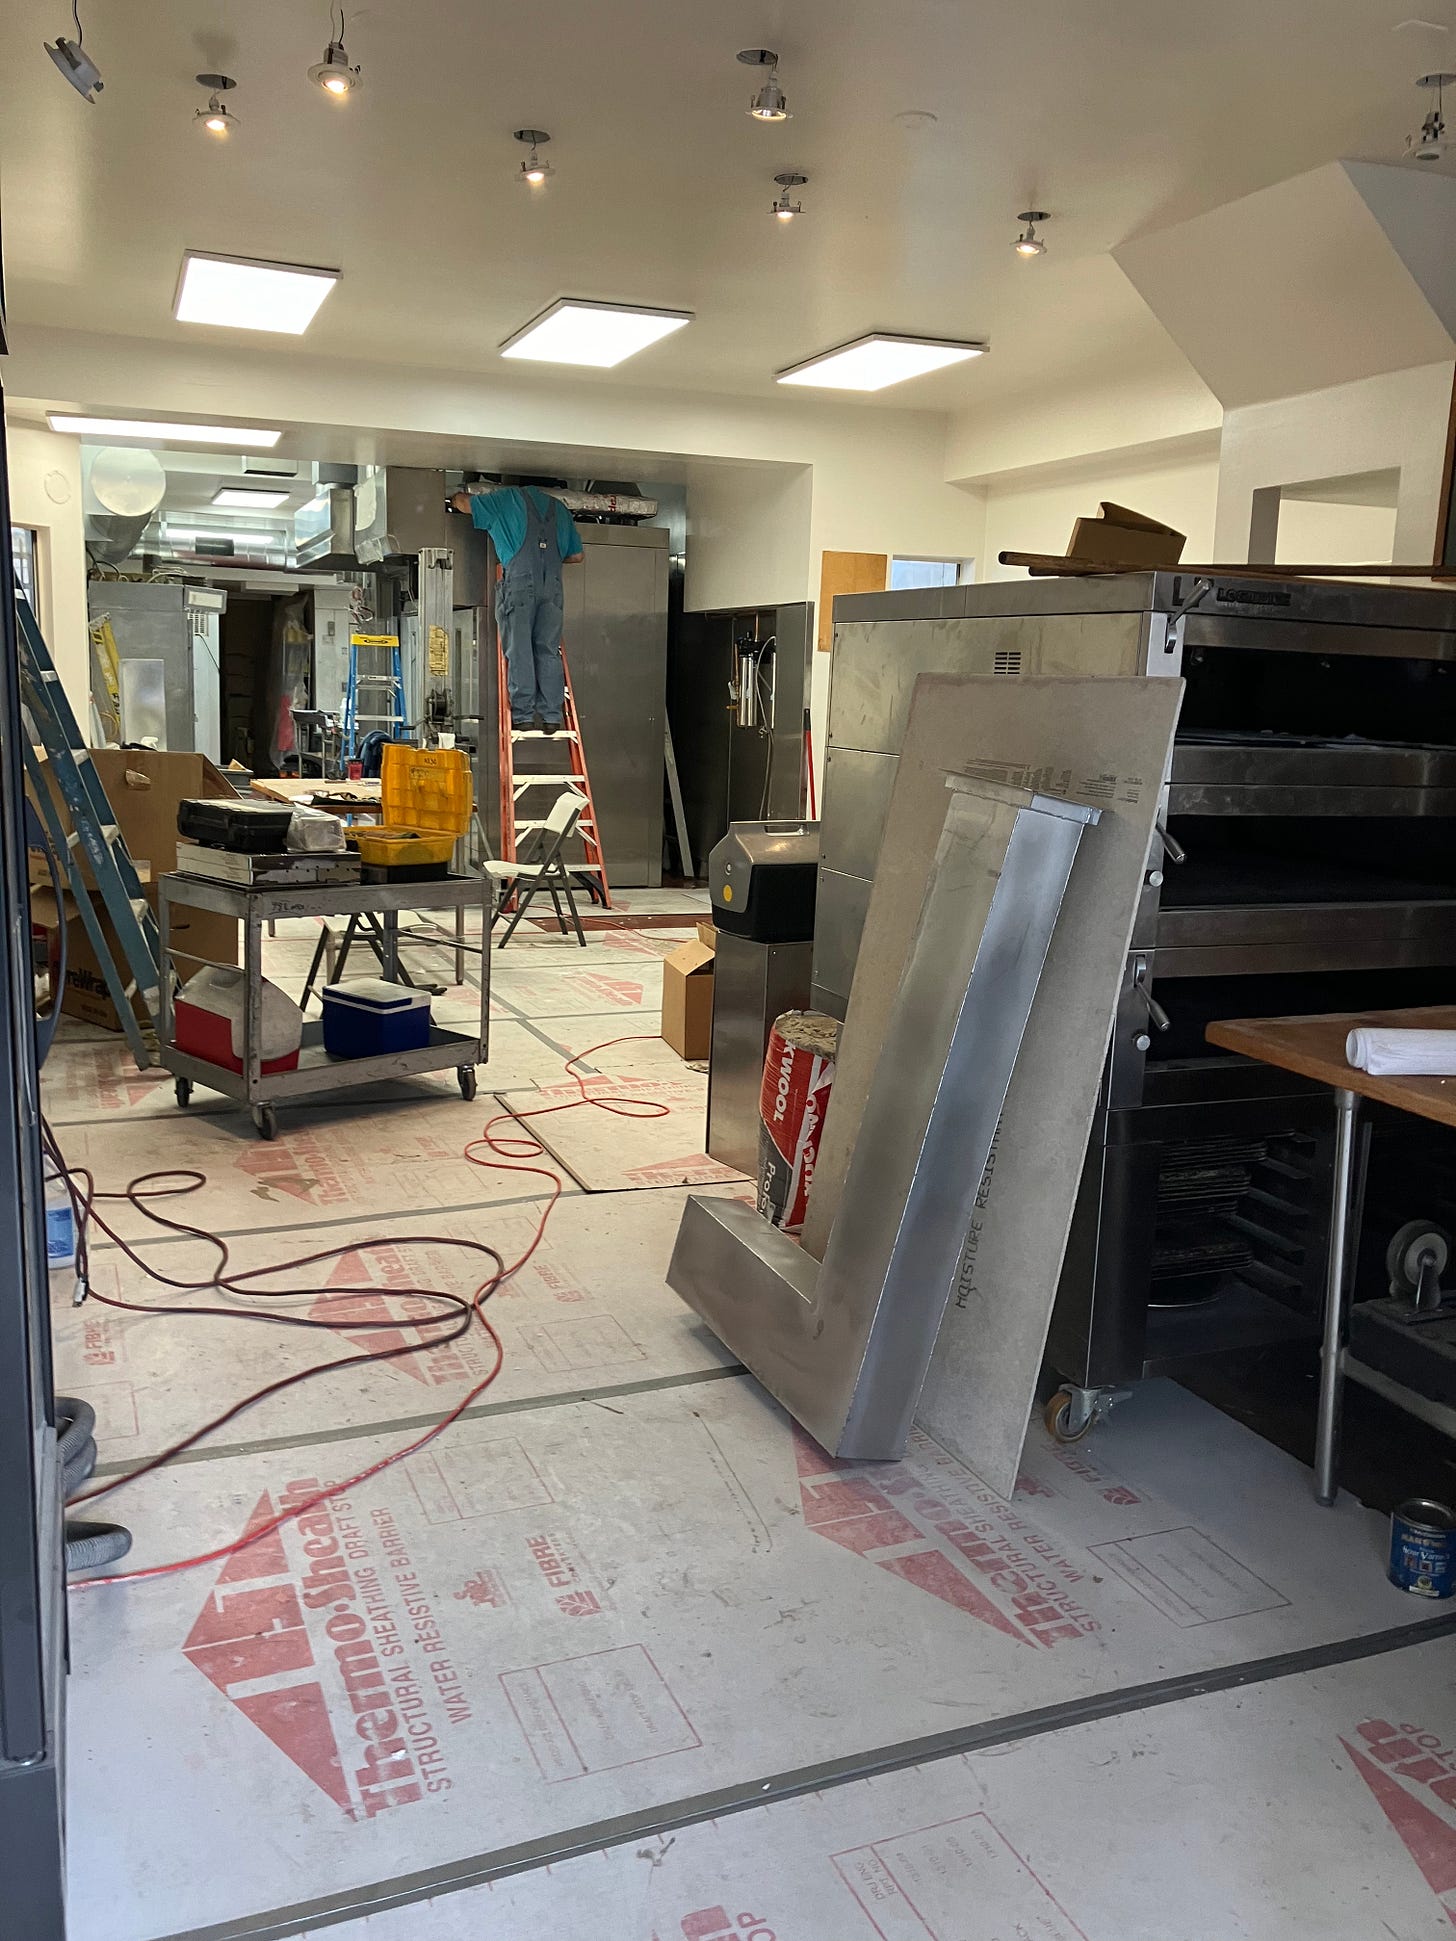 a pictuer of the inside of a bakery that has been taken apart to install a new oven. lots of construction equipment and materials inside a bakery